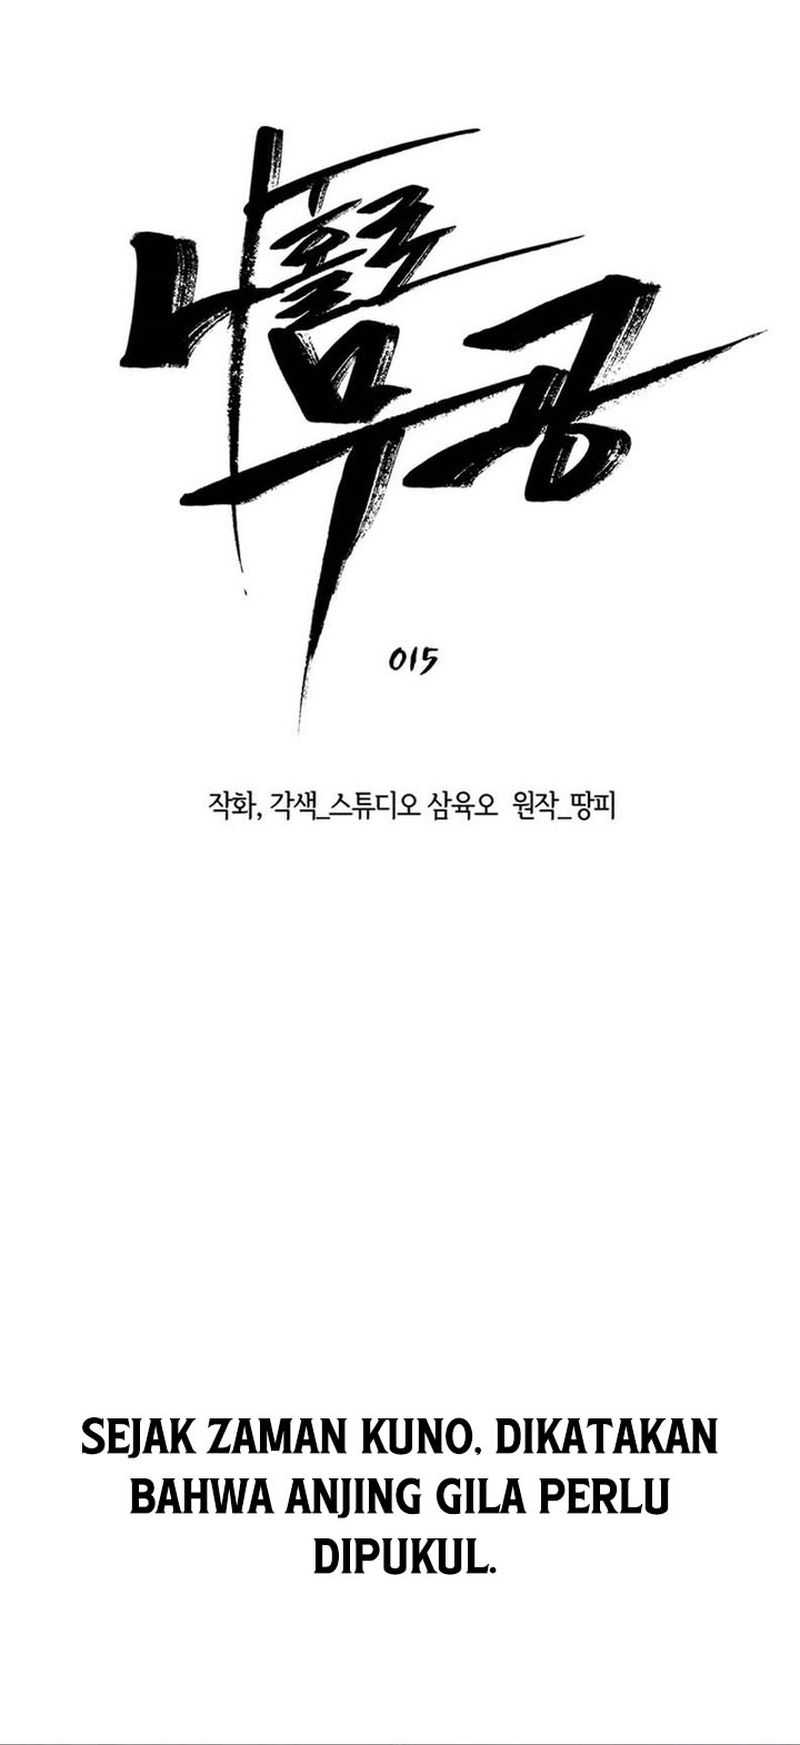 Martial Arts Alone Chapter 15